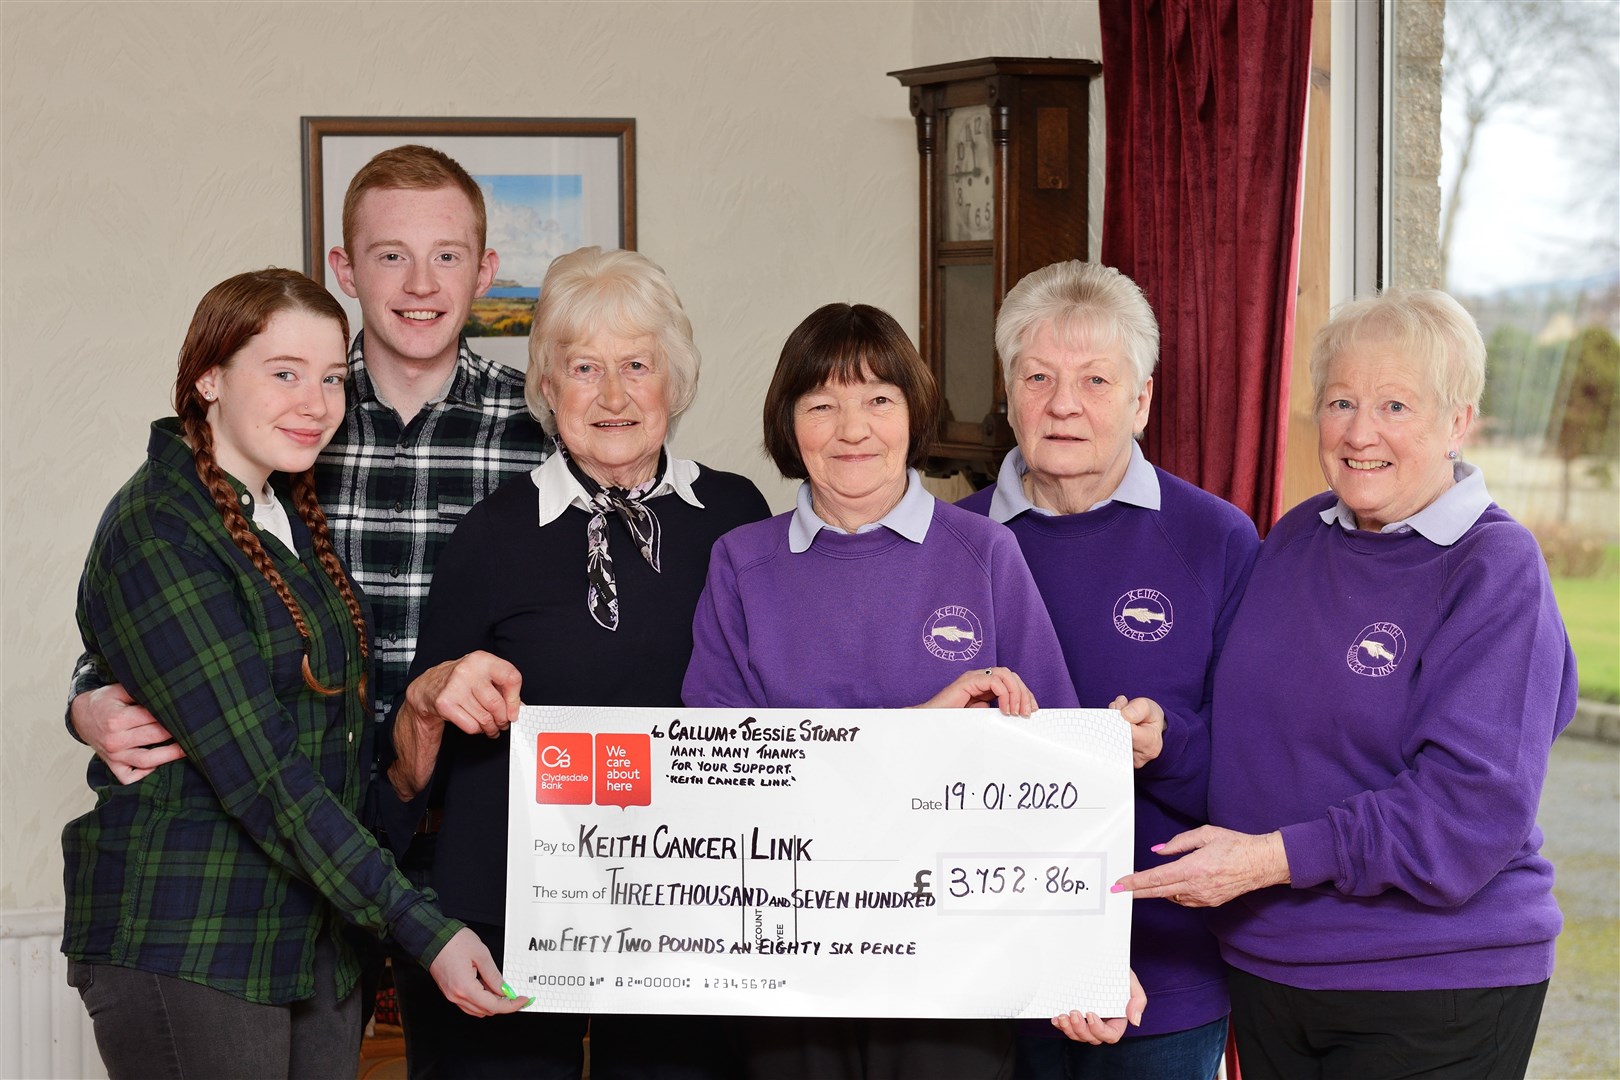 Keith man Callum Stuart and (from left) girlfriend Kayleigh Dalgarno and granny Jessie Stuart present a cheque for £3752 to Keith Cancer Link's Isobel Sadowski, Irene Martin and Adeline Reid. Picture: John MacLeod/Moraylight.